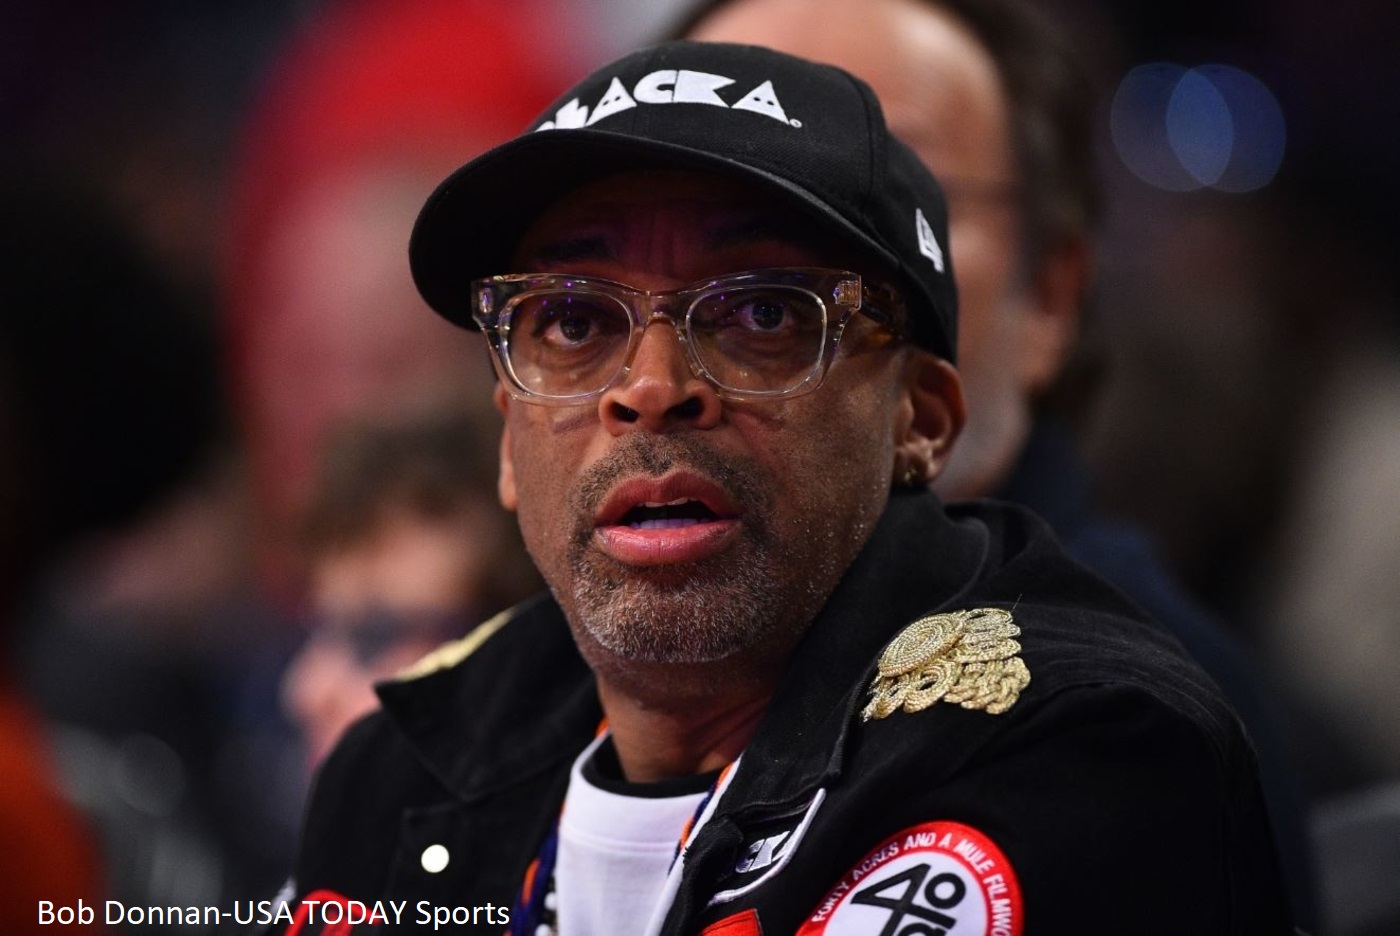 Why Did the New York Knicks Decide to Take On Spike Lee?